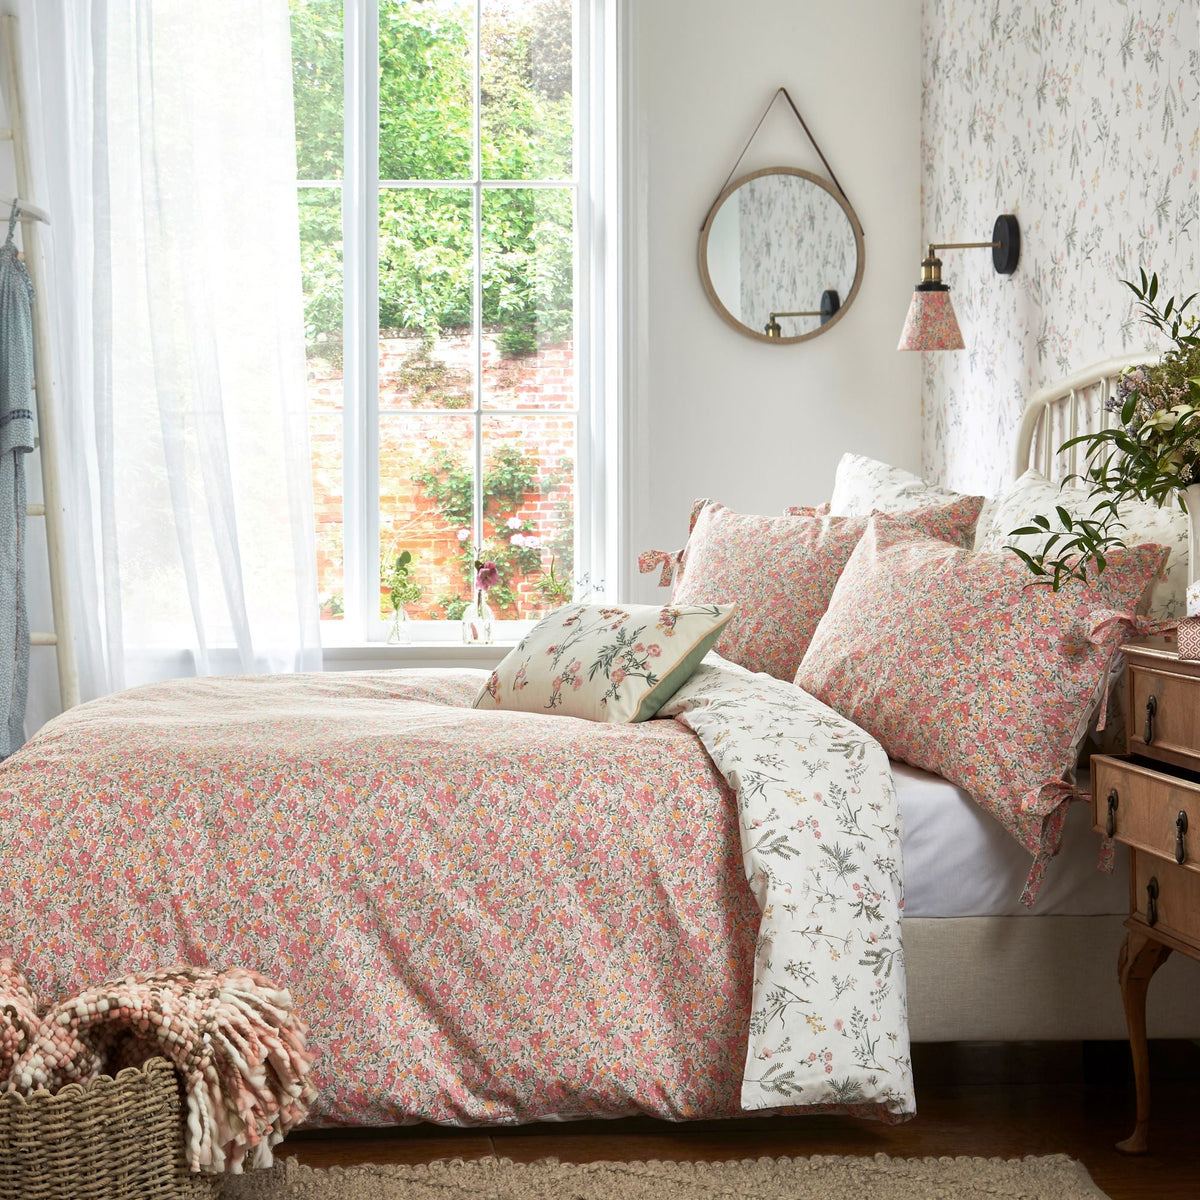 The Laura Ashley Lodestone Coral duvet set luxuriously soft and 100% cotton floral design with soft pink colours